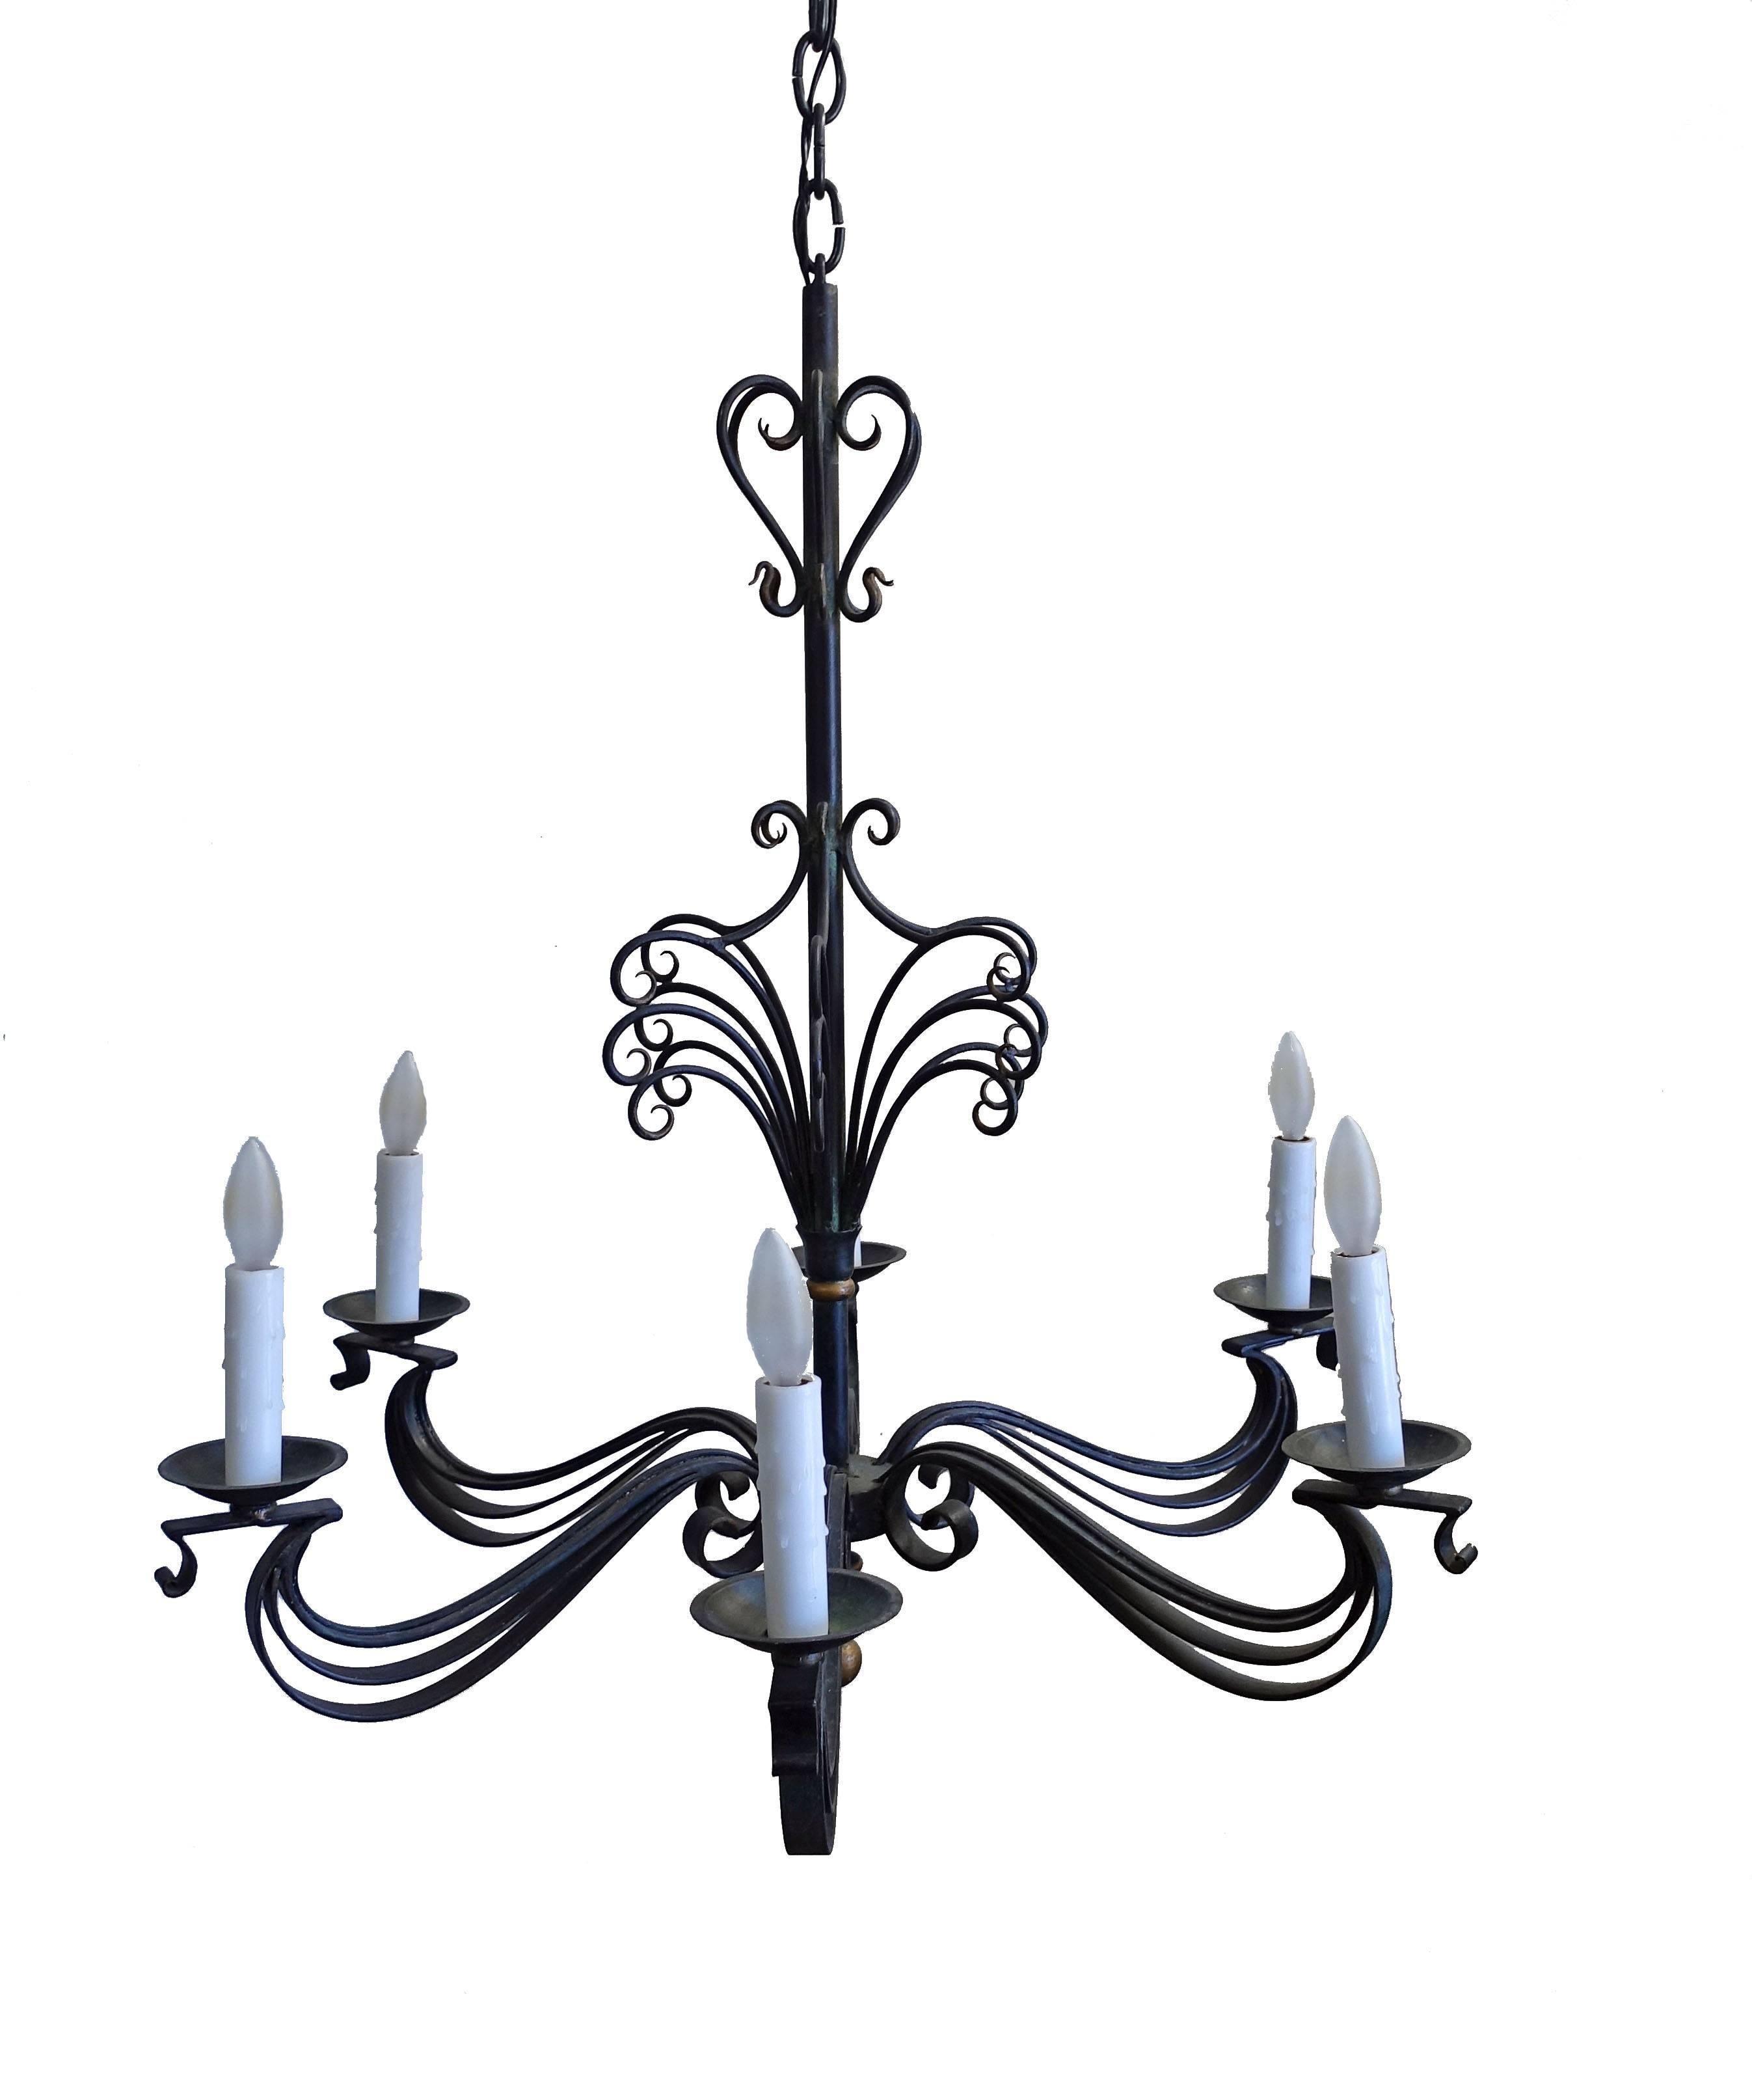 Hollywood Regency French Wrought Iron Chandelier Light Fixture For Sale